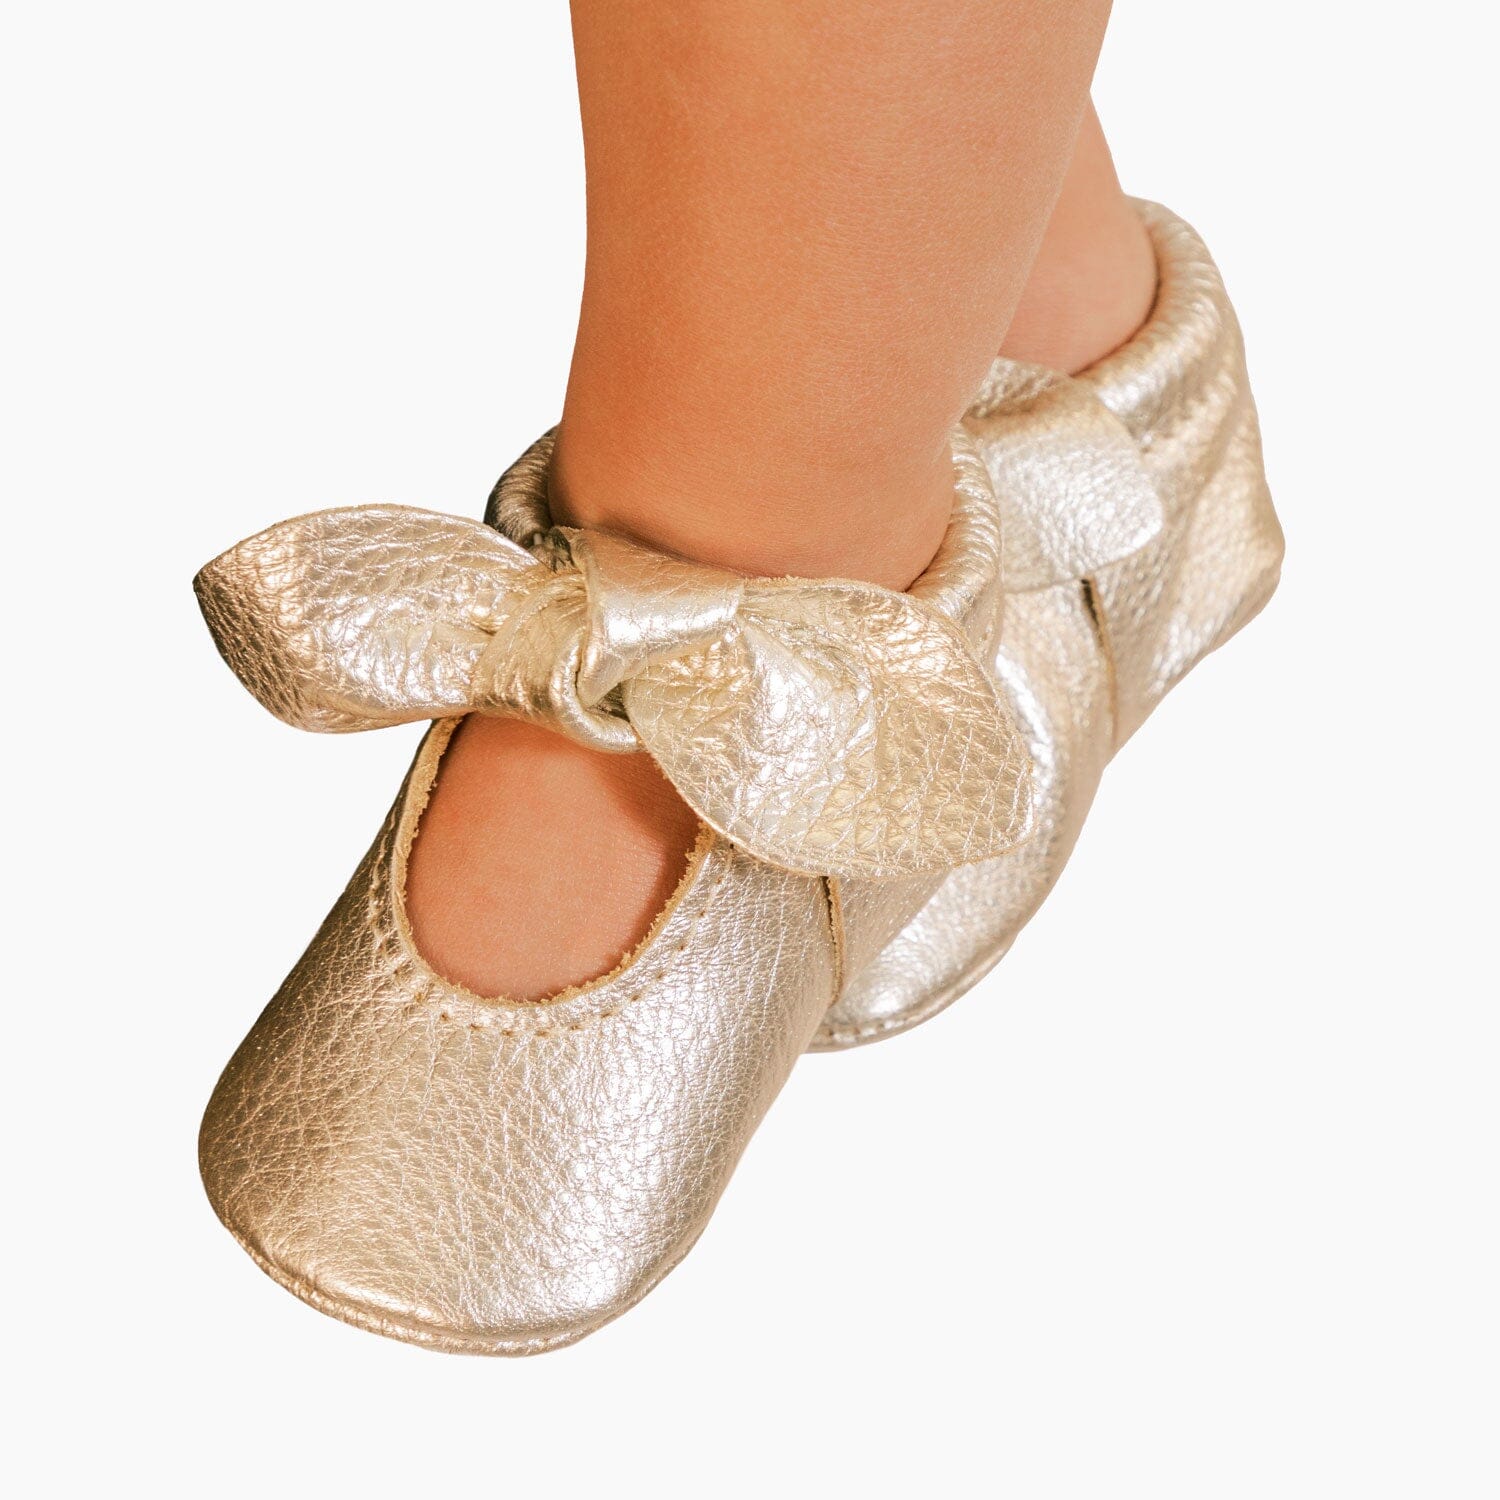 Newborn Platinum Knotted Bow Mocc Knotted Bow Mocc Newborn 